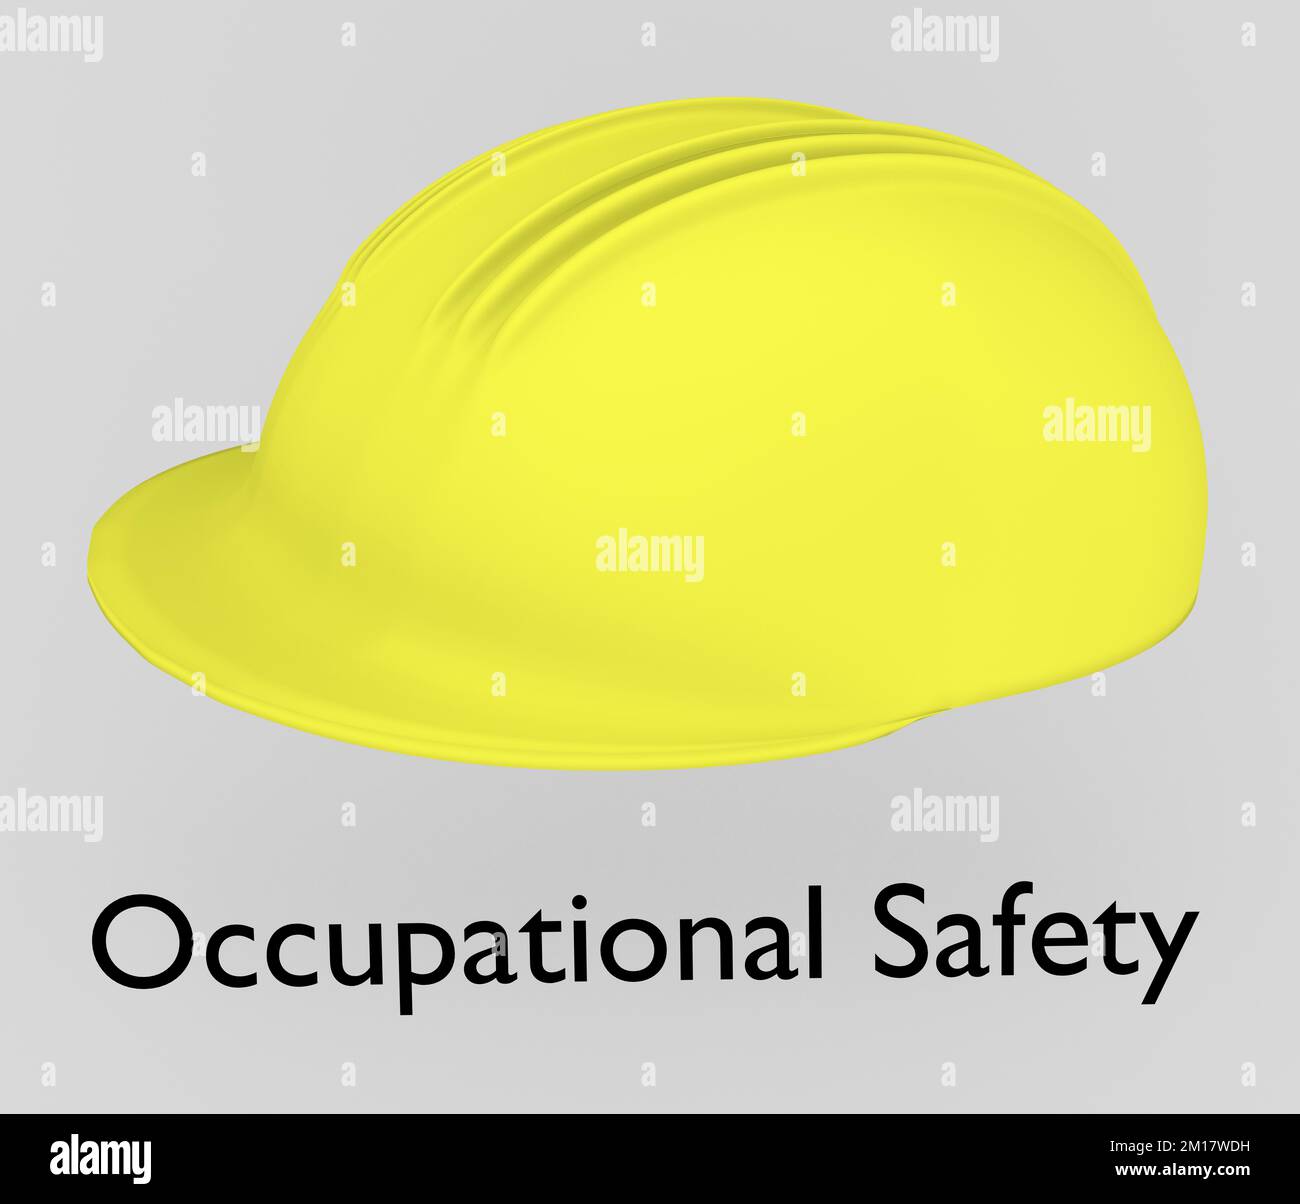 3d illustration of Occupational Safety text under a yellow safety helmet, isolated over a gray background. Stock Photo